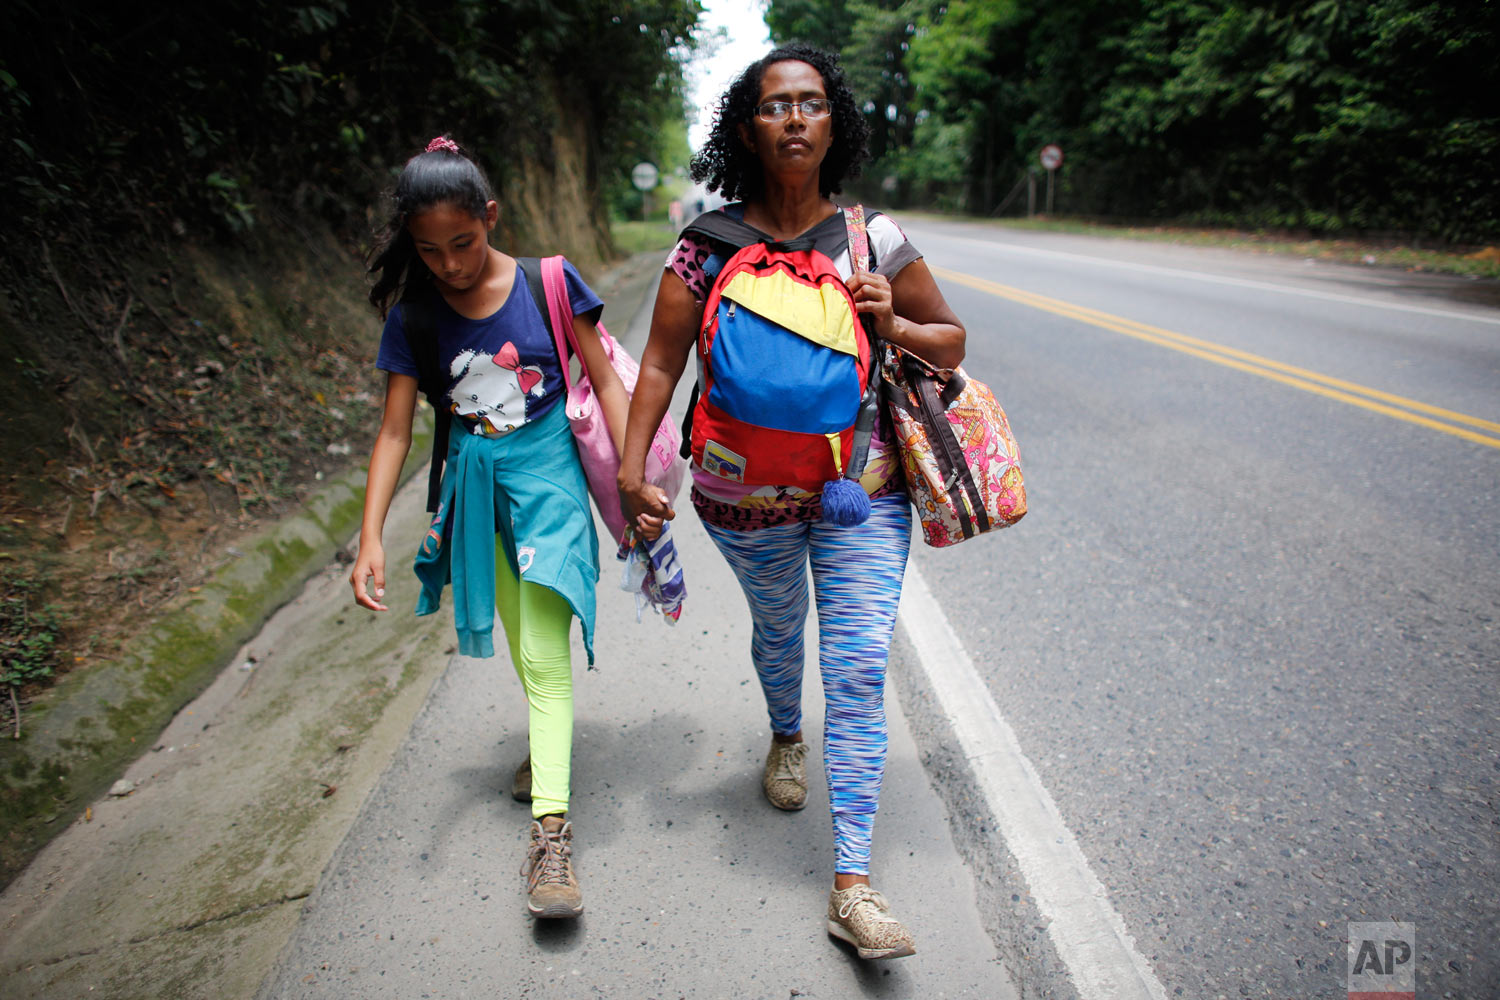 In this Sept. 2, 2018 photo, Venezuelan Sandra Cadiz holds the hand of her 10-year-old daughter Angelis as they walk on the shoulder of the road during their journey to Peru, near Dagota, Colombia. When Sandra Cadiz began struggling to feed her daug